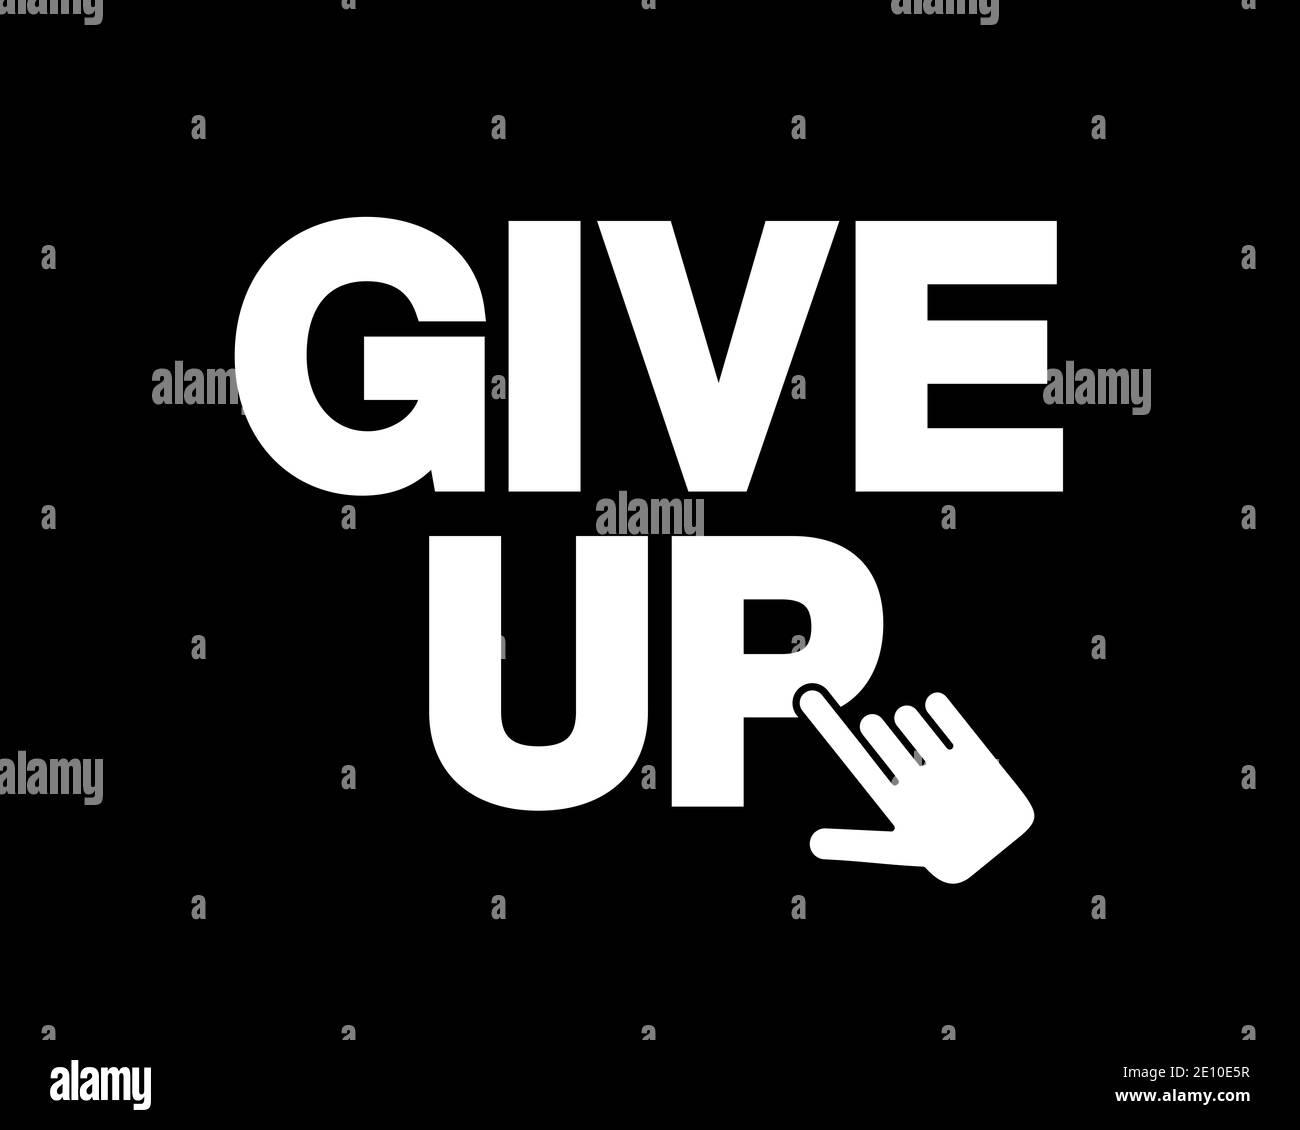 Give up - discouraging hand and cursor is clicking on the text. Negative desperation and hopelessness after failure and defeat. Vetor illustration. Stock Photo